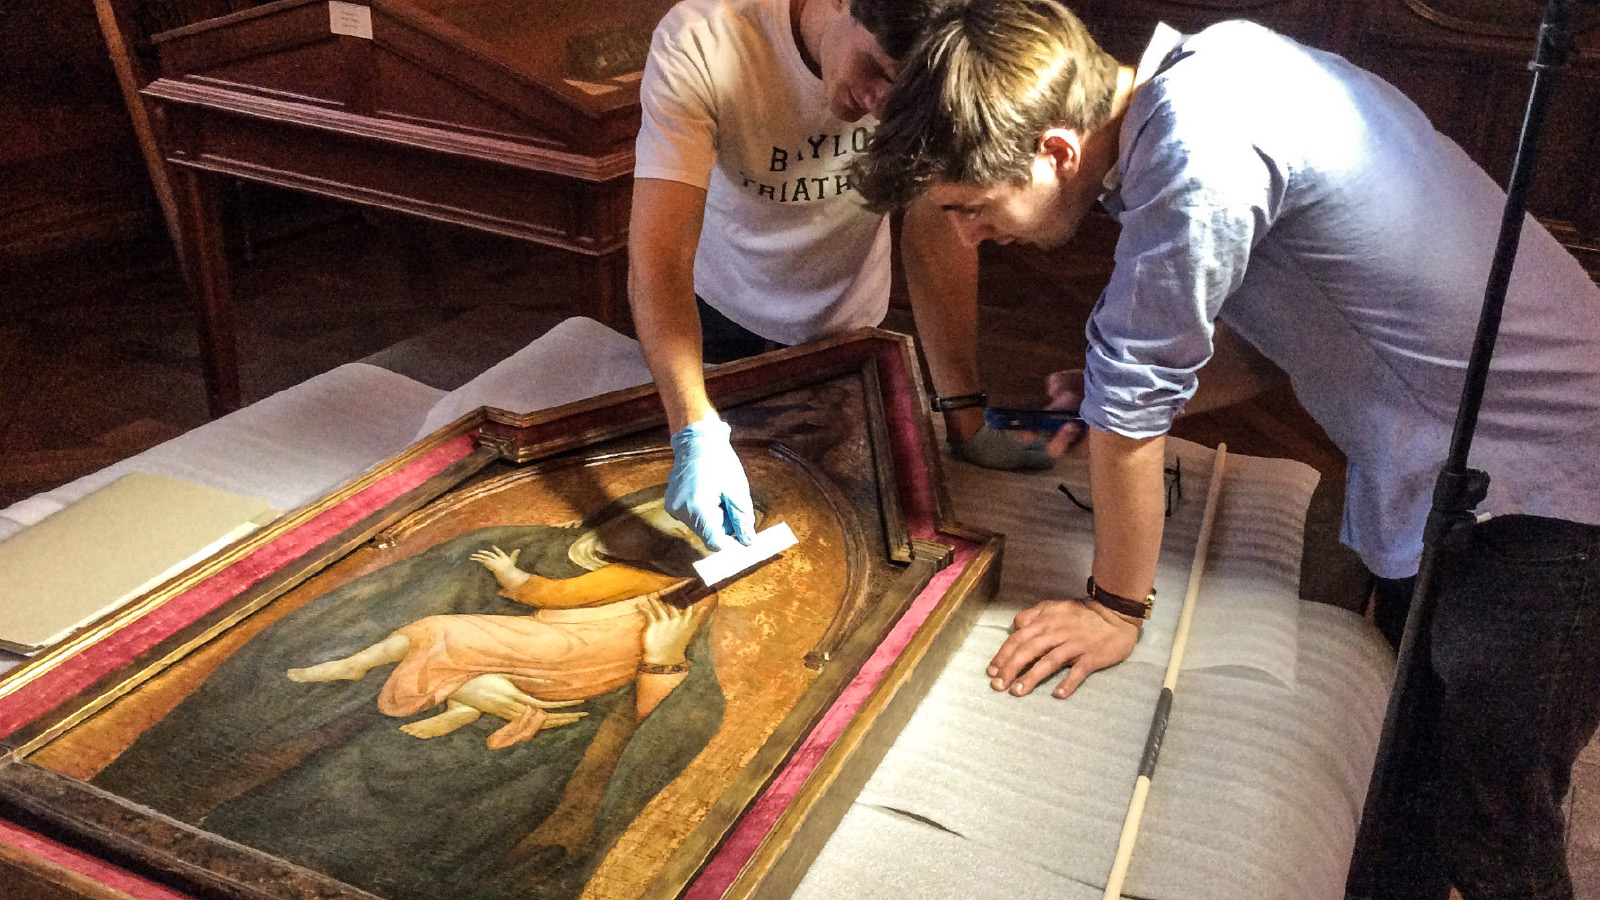 Two University Scholars (Nathan Eberlein, BA '17 and Conner Moncrief, BA '16) examine a 14th-century Madonna and Child painted by a follower of the Sienese artist Pietro Lorenzetti in the Armstrong Browning Library